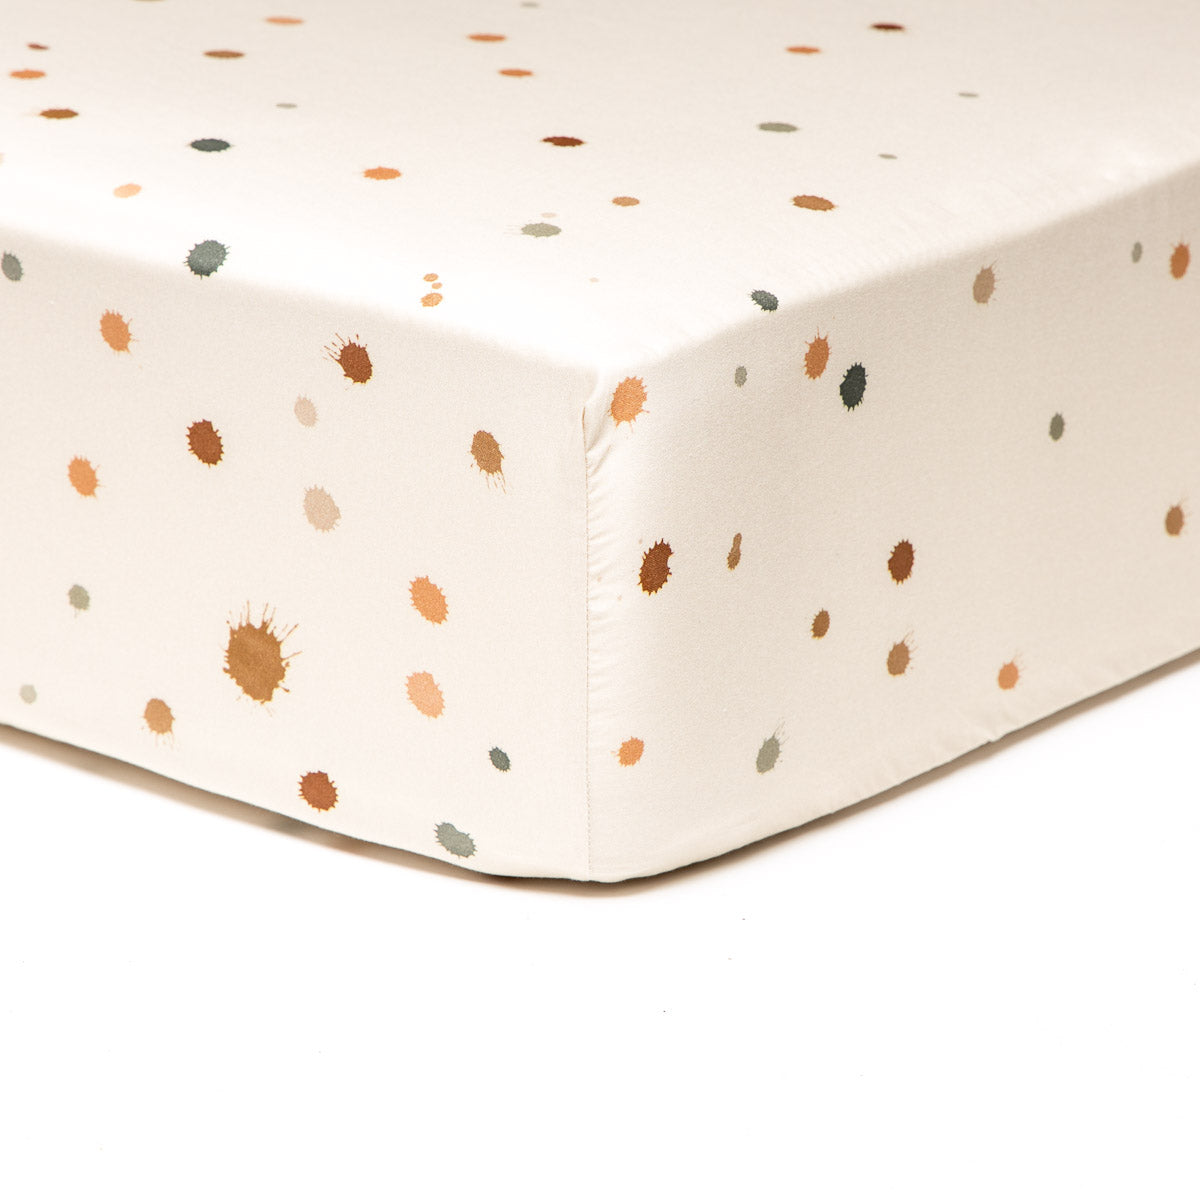 Fitted sheet - Confetti, 60 x 120cm